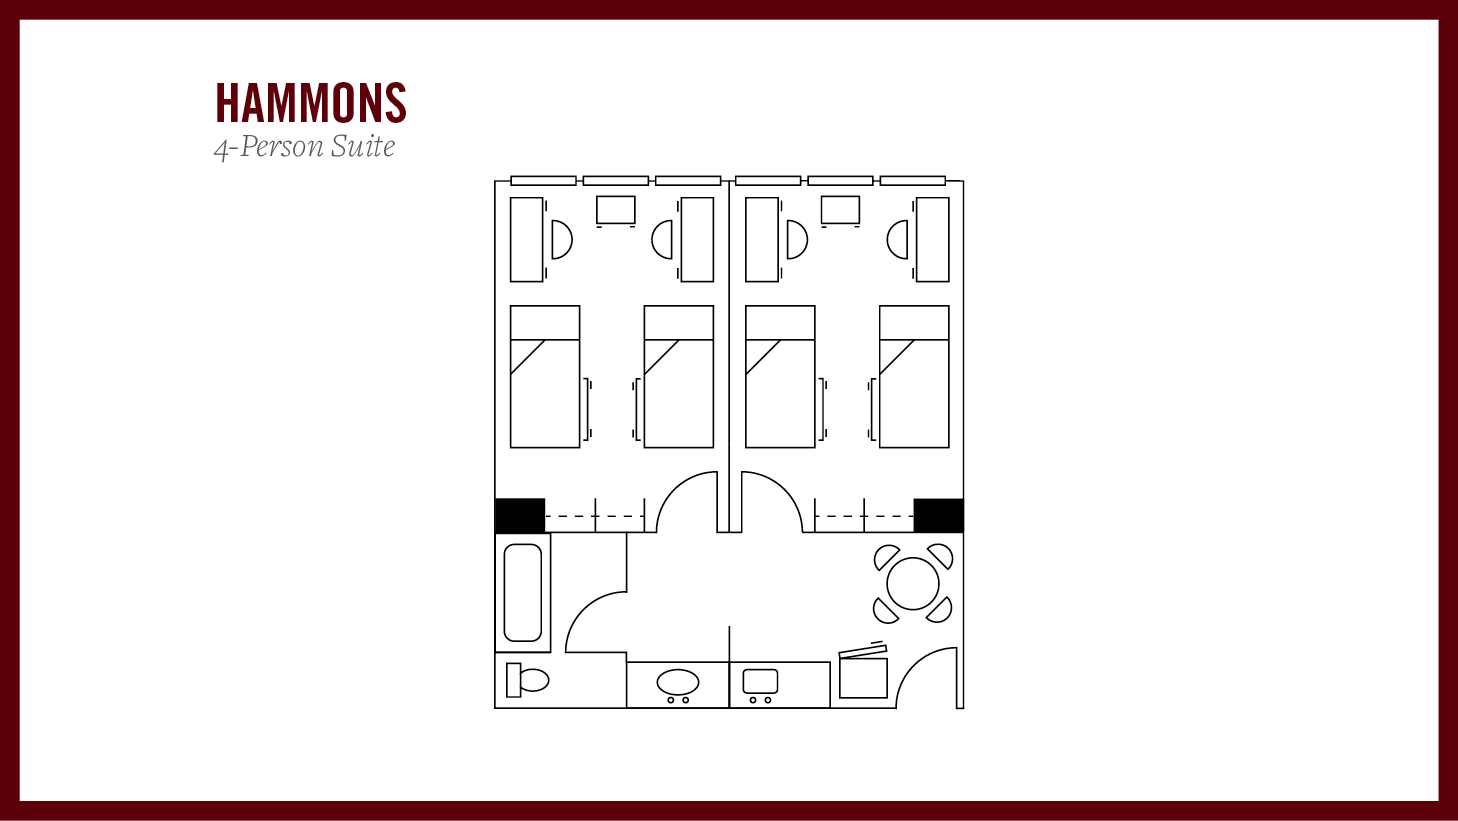 Hammons 4-person suite